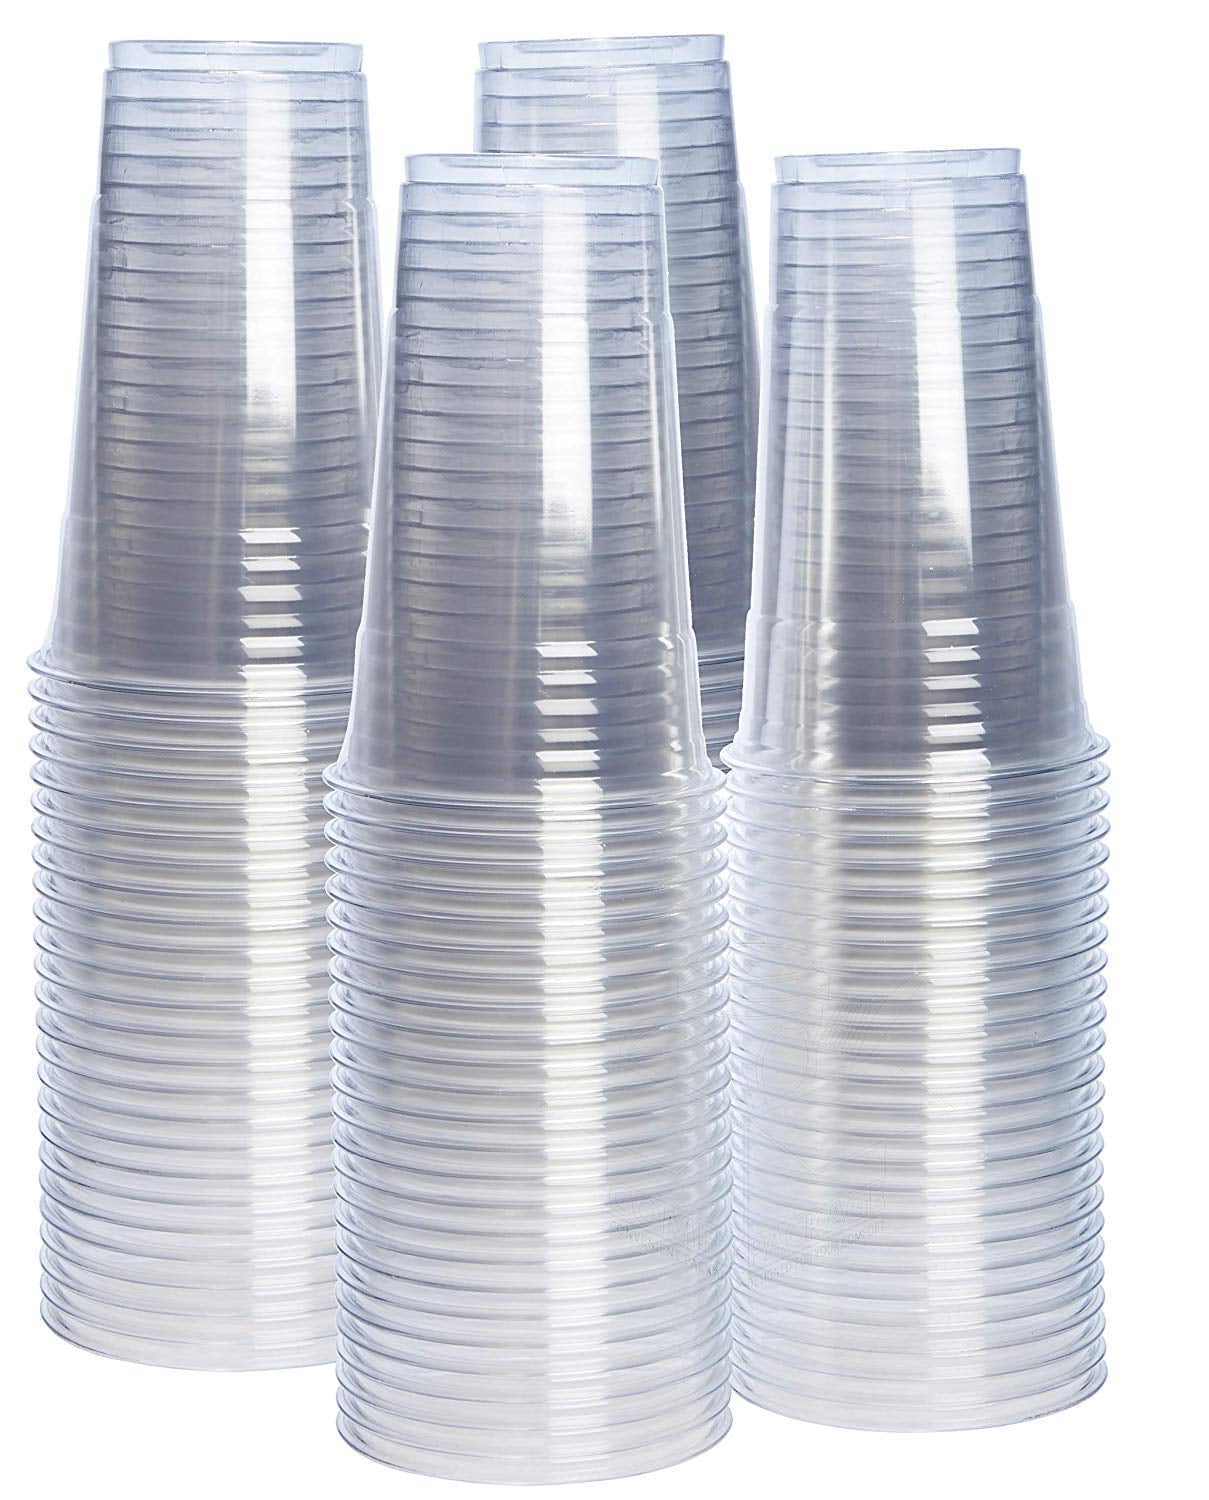 24 oz Large Clear Plastic Cups with Lids Great for Iced Coffee etc. Details about   100 count 